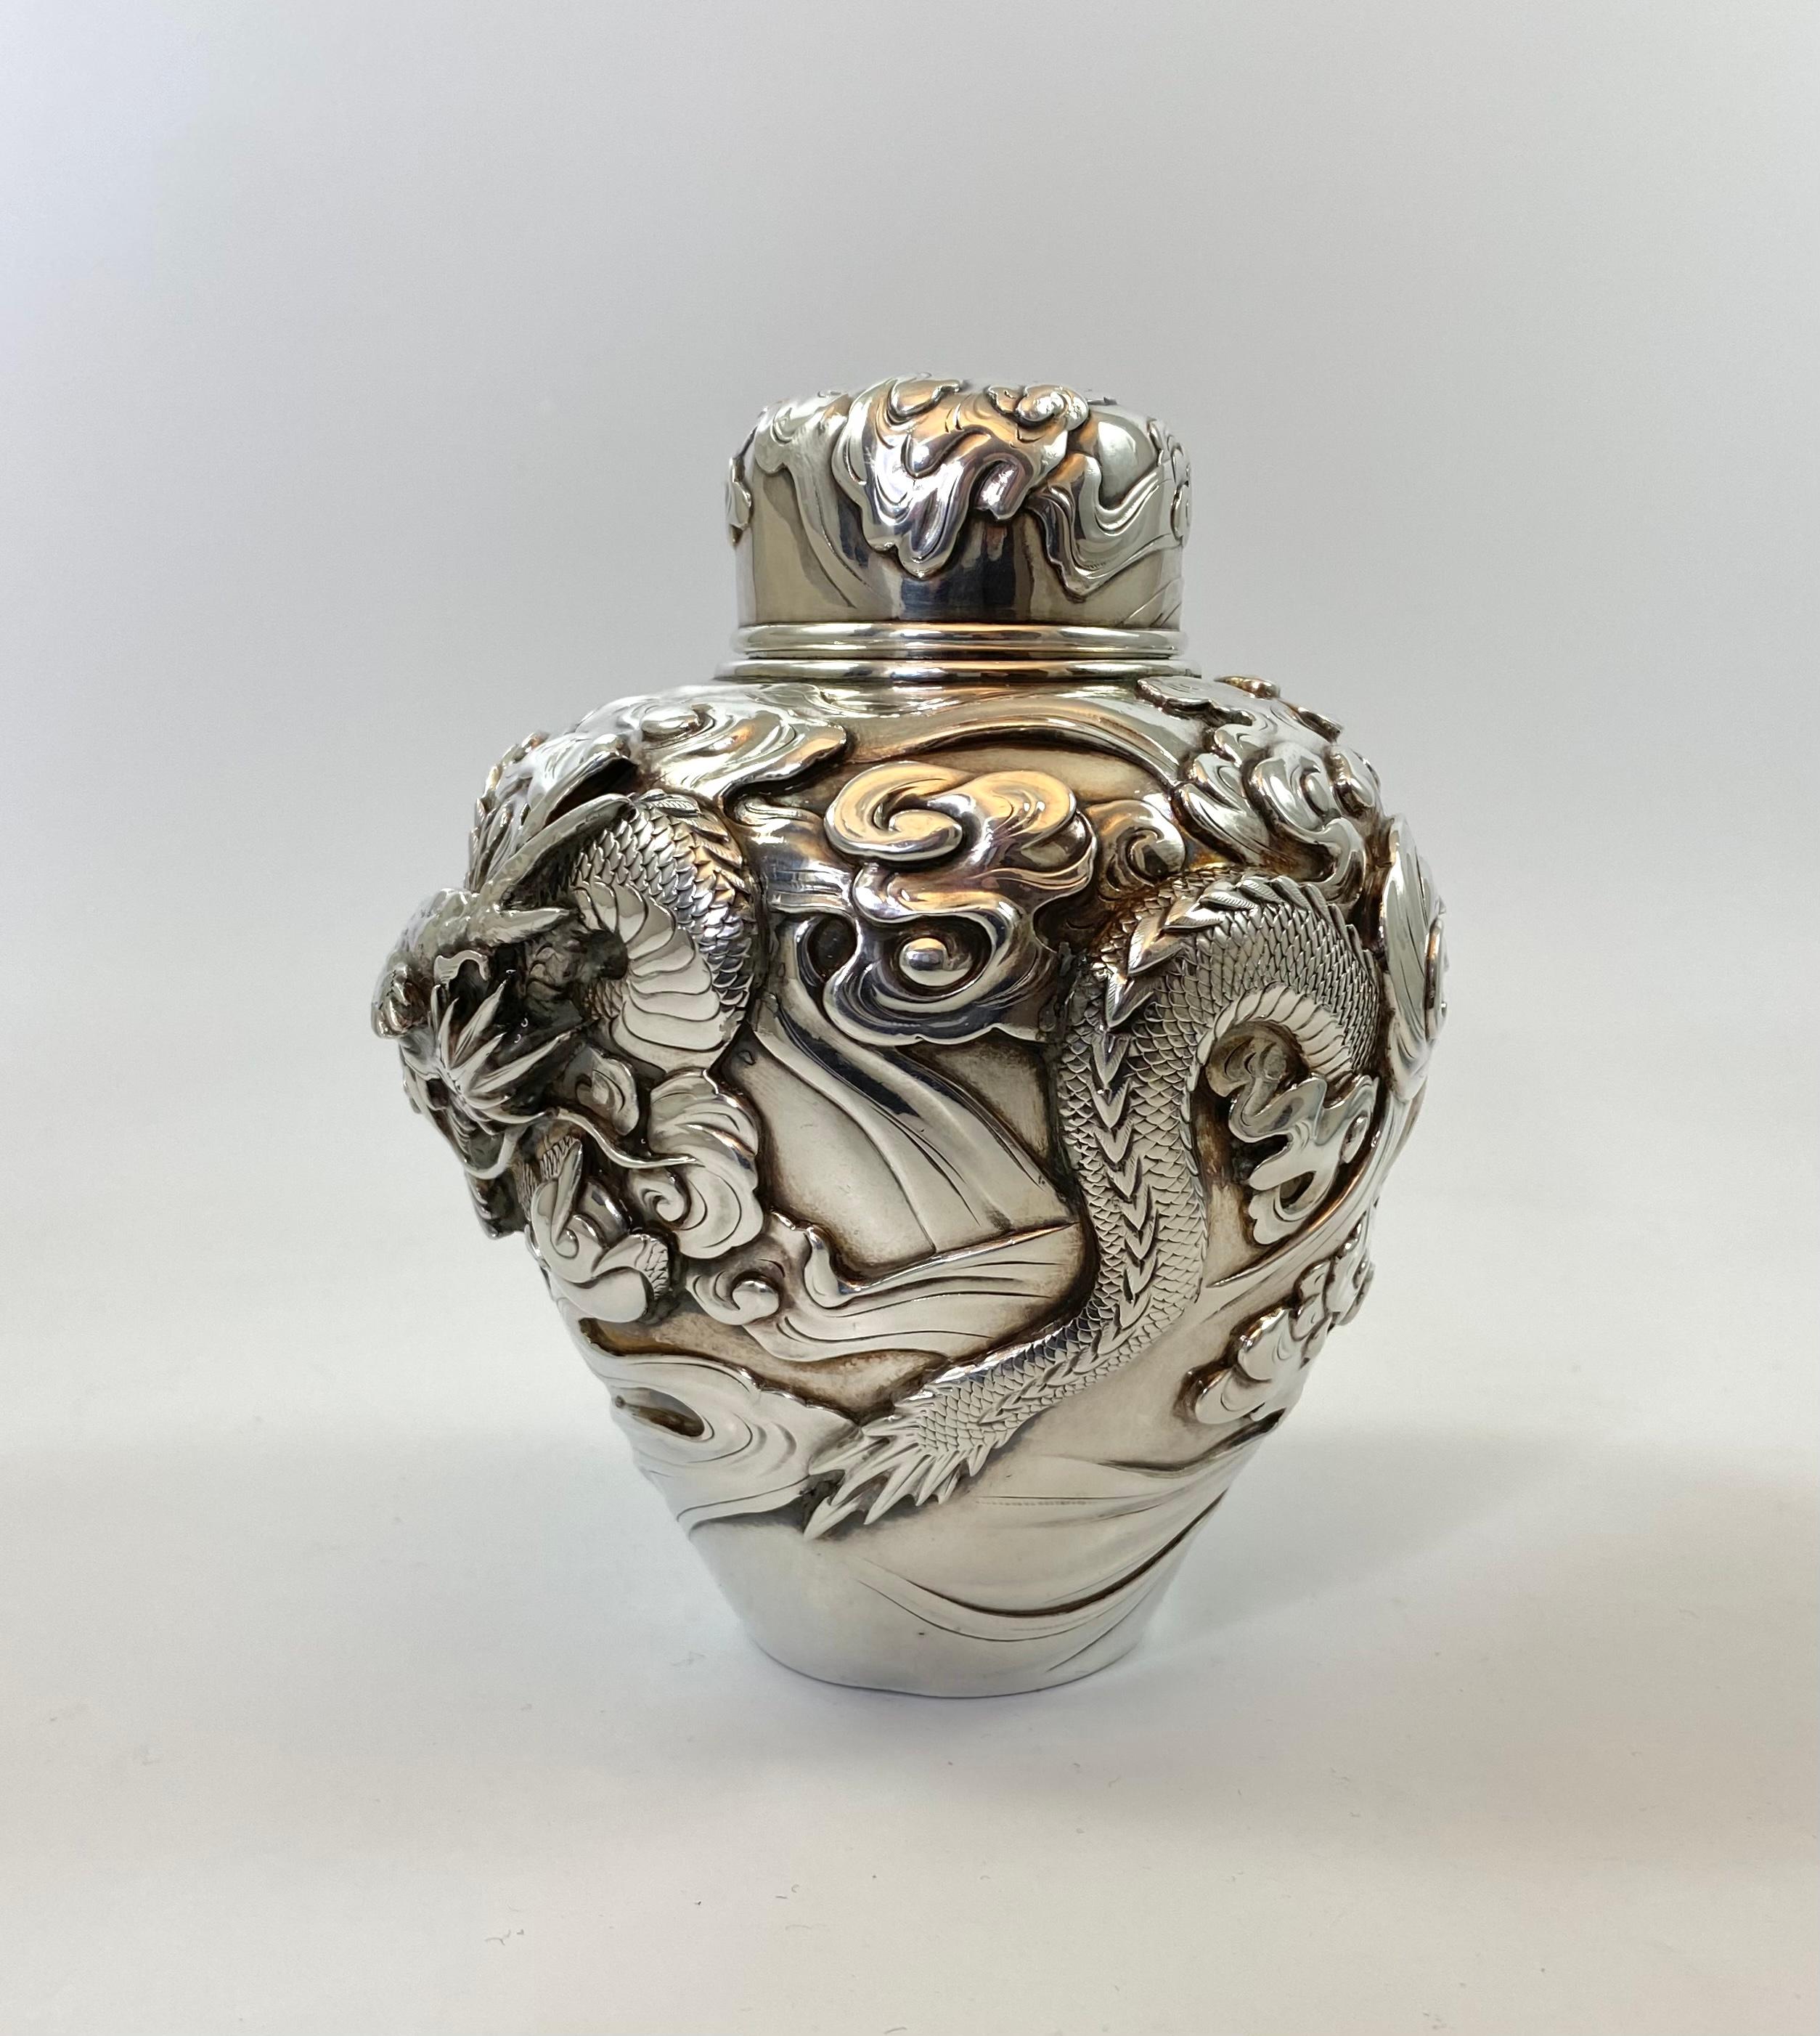 A fine Japanese solid silver tea caddy or natsume, c.1890. Meiji Period. The body, finely cast in heavy relief, and chased, with a sinuous dragon grasping the Pearl of Wisdom, whilst flying above a raging sea.
The cover decorated with further